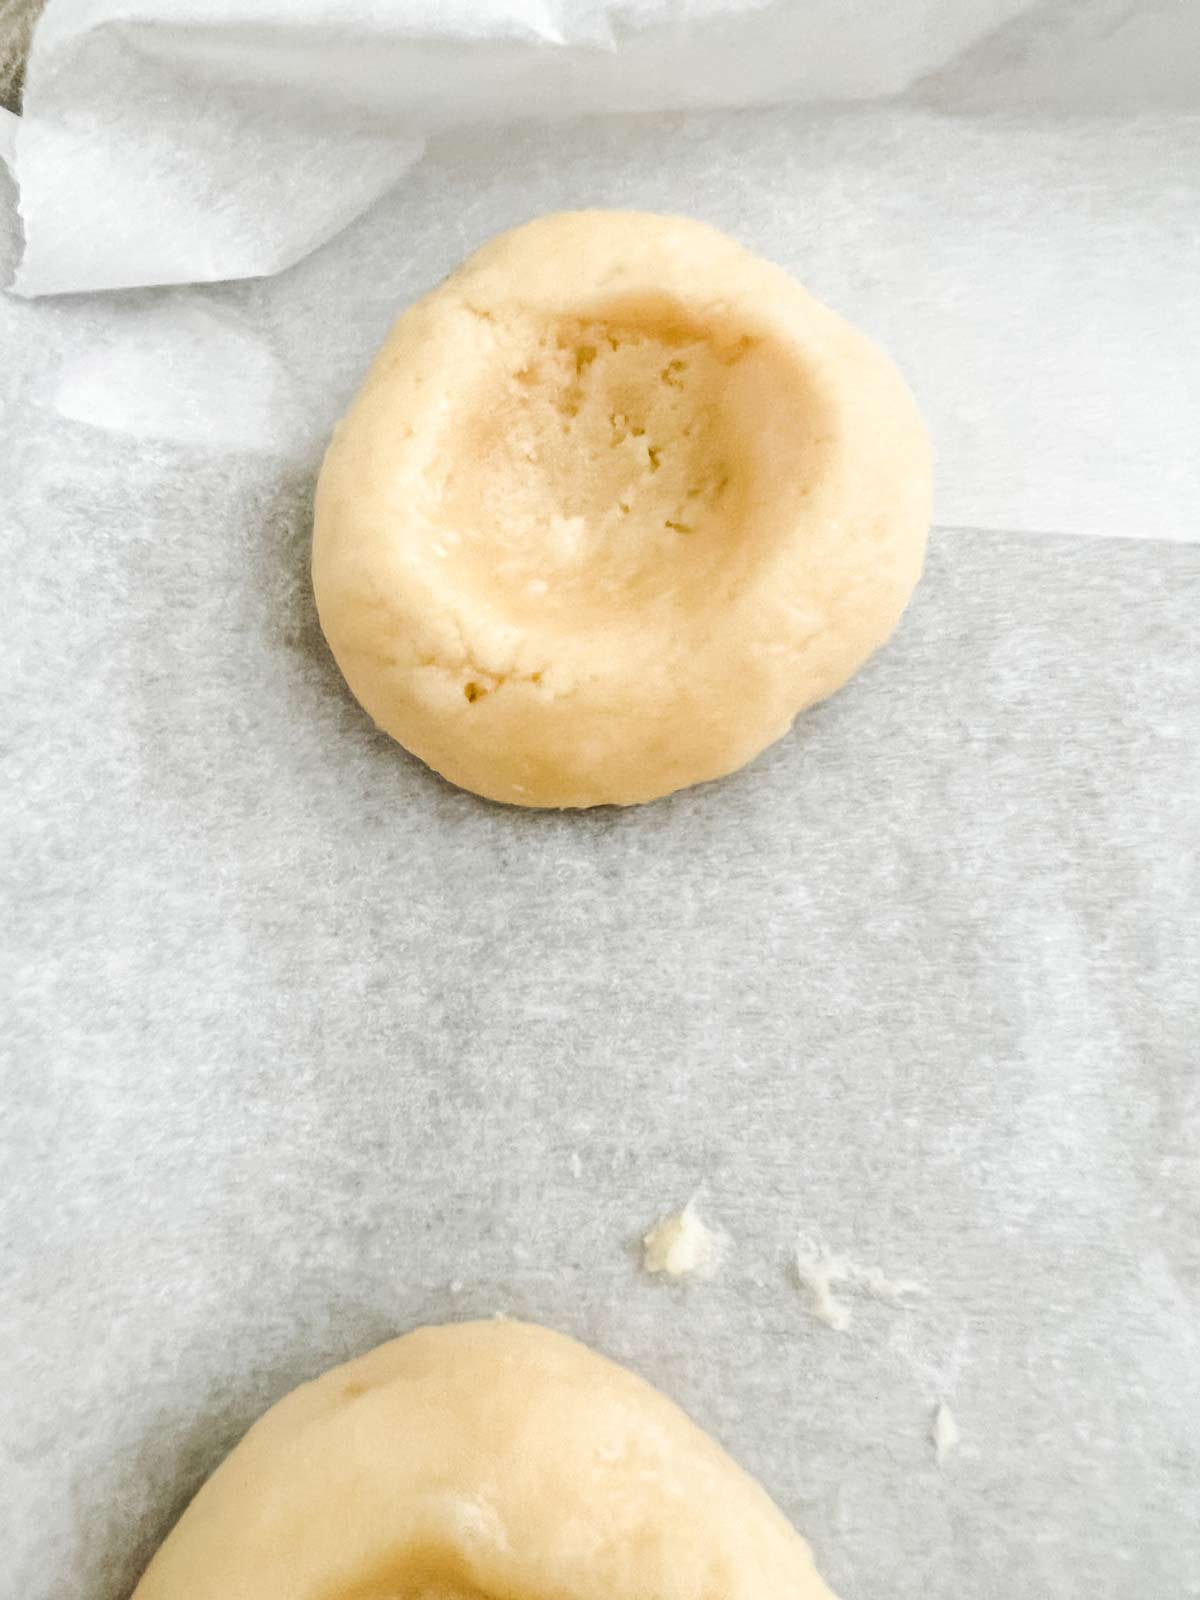 Thumbprint cookie that is unfilled and ready to bake.